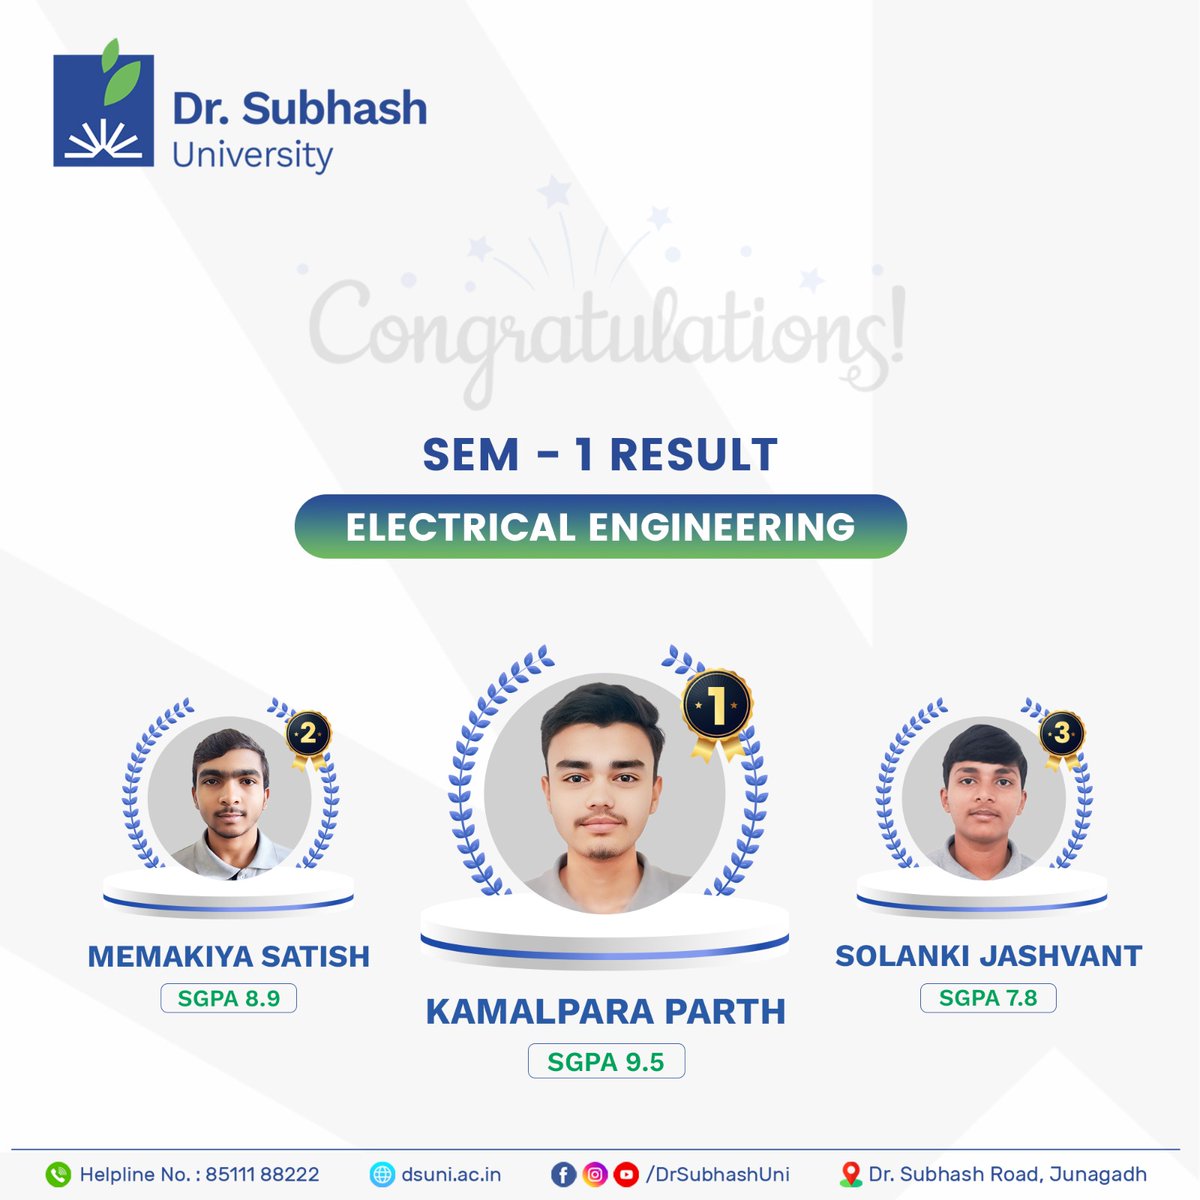 ⚡️ Sparks flying as DSU reveals the electrifying results for Sem 1 in Electrical Engineering! 📚💡 Congratulations to our brilliant students for shining bright and paving the way for a future filled with innovation and success! 🌟 #DSU #DrSubhashUniversity #ElectricalEngineering